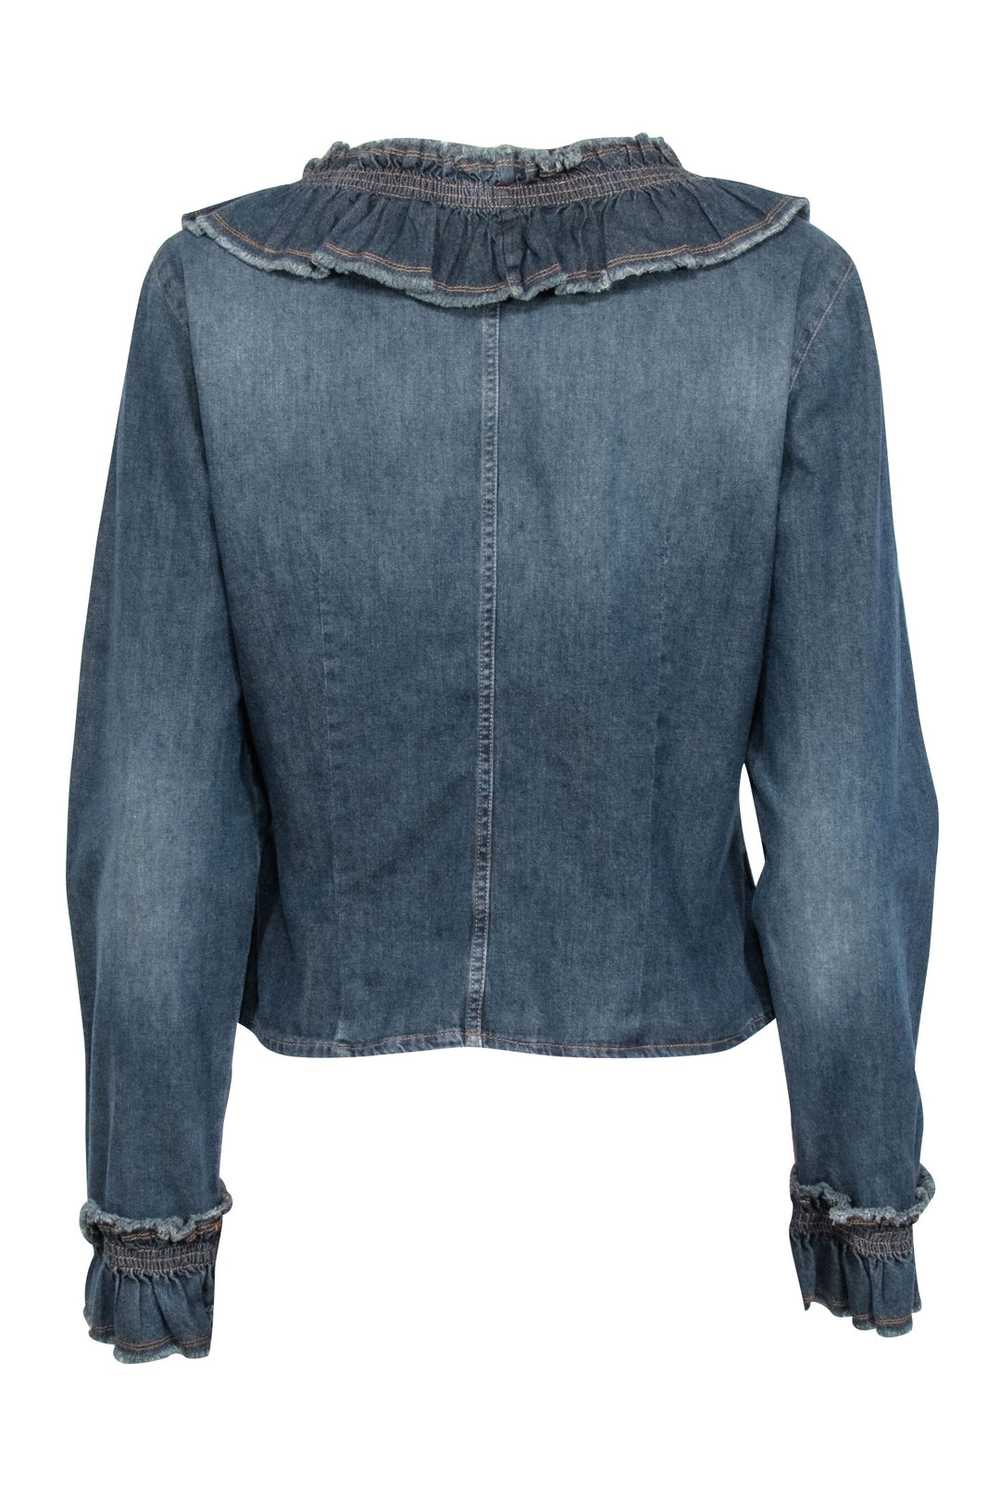 Moschino Jeans - Chambray Ruffled Button Up Blous… - image 3